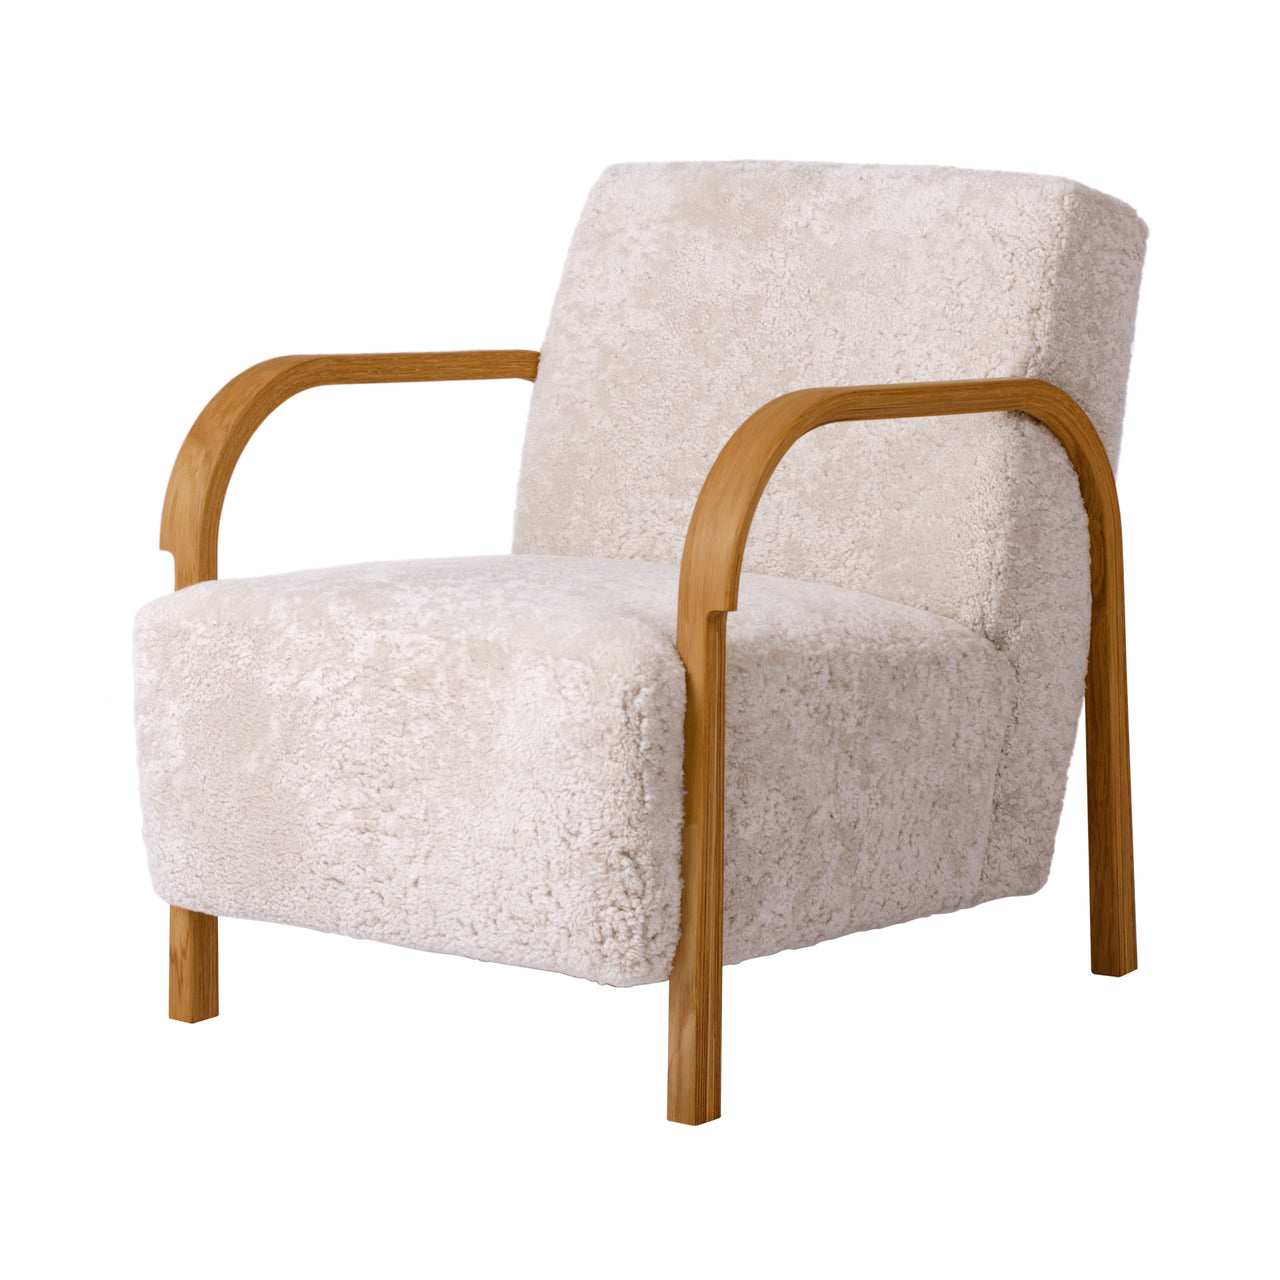 Arch Lounge Chair: Upholstered + Natural Oiled Oak